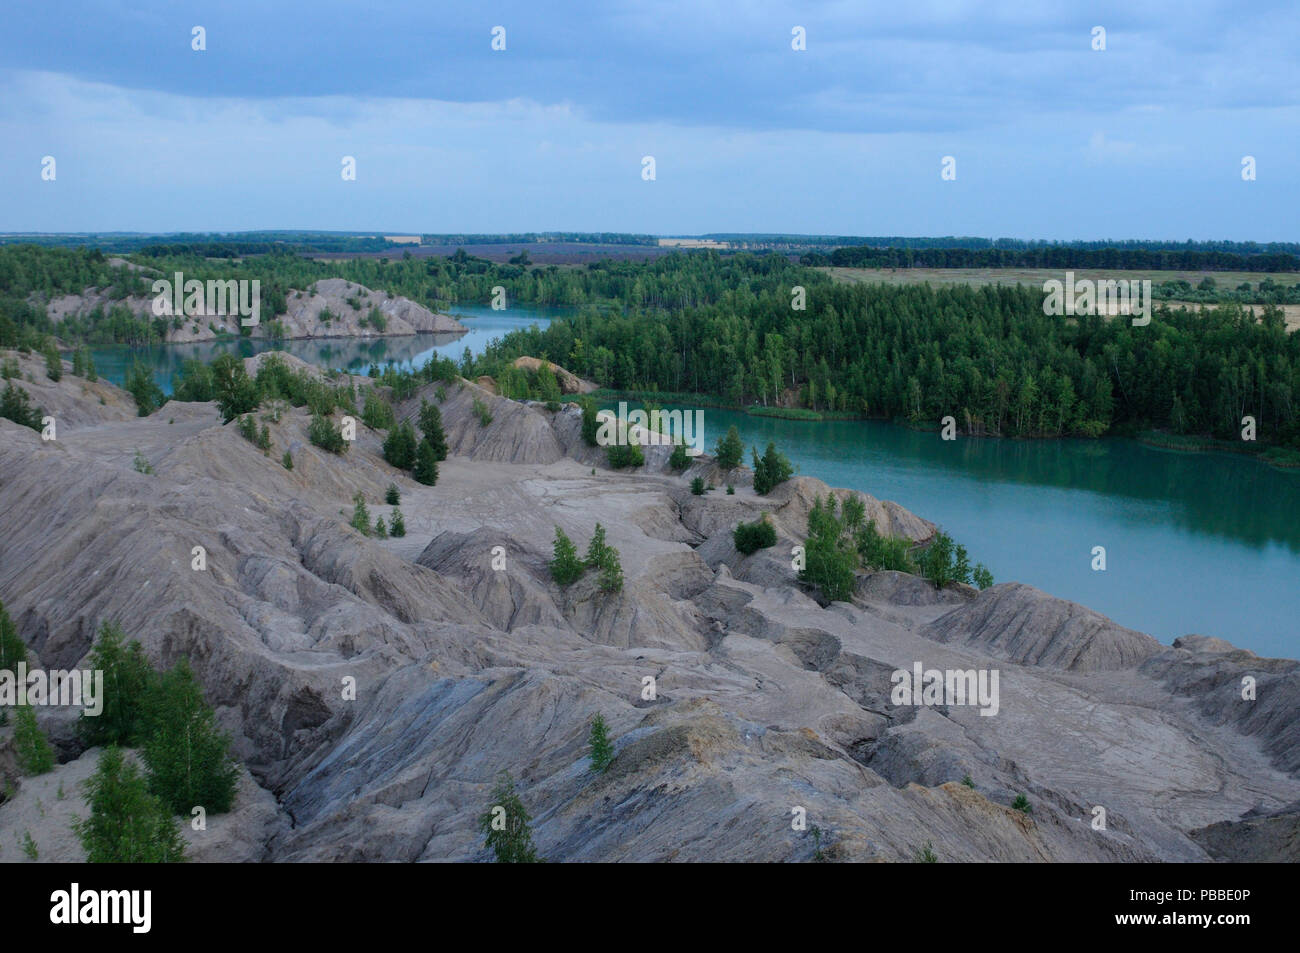 View from the top of the hill over the former brown coal open pits filled now by waters, Ushakov open pits, Tula region, Russia Stock Photo